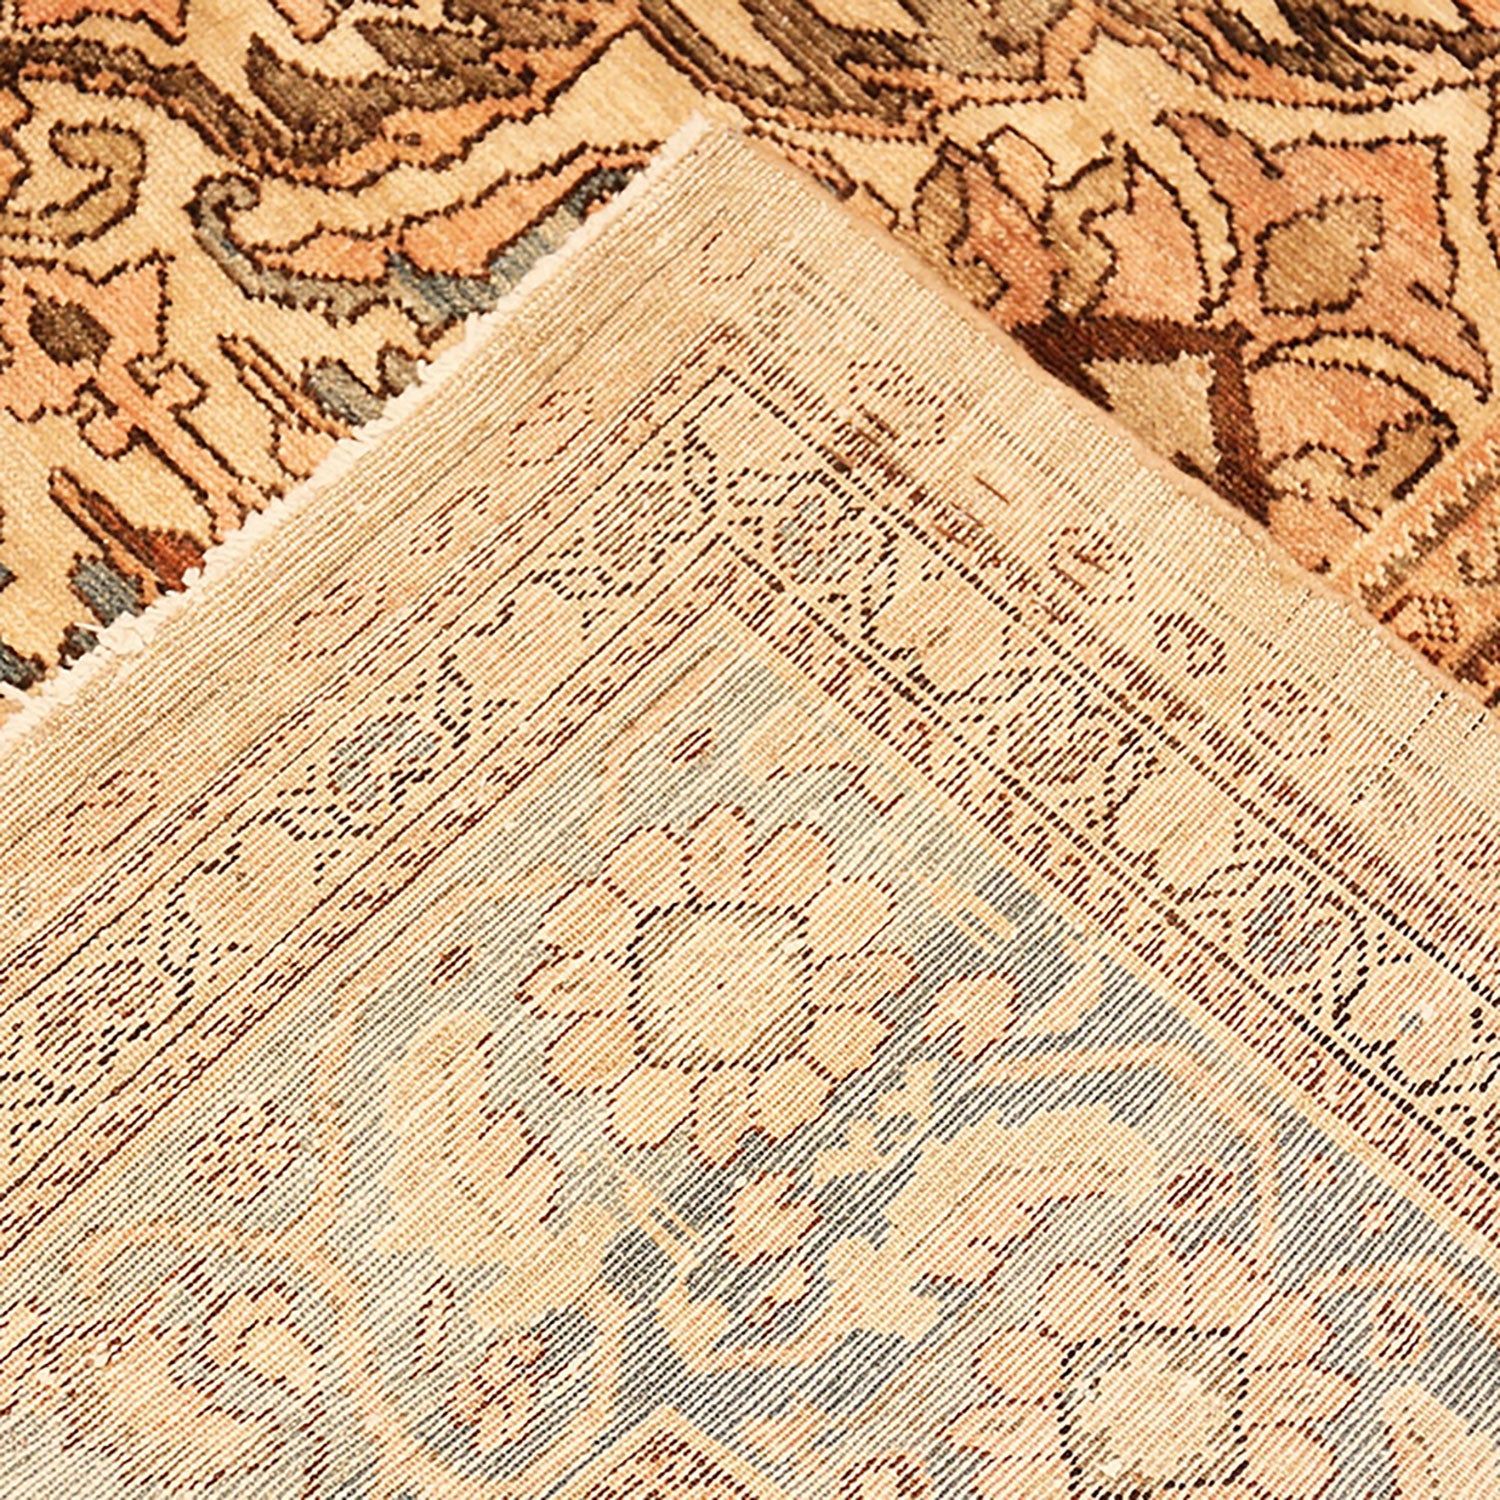 Close-up view of a traditional woven rug showcasing intricate patterns.